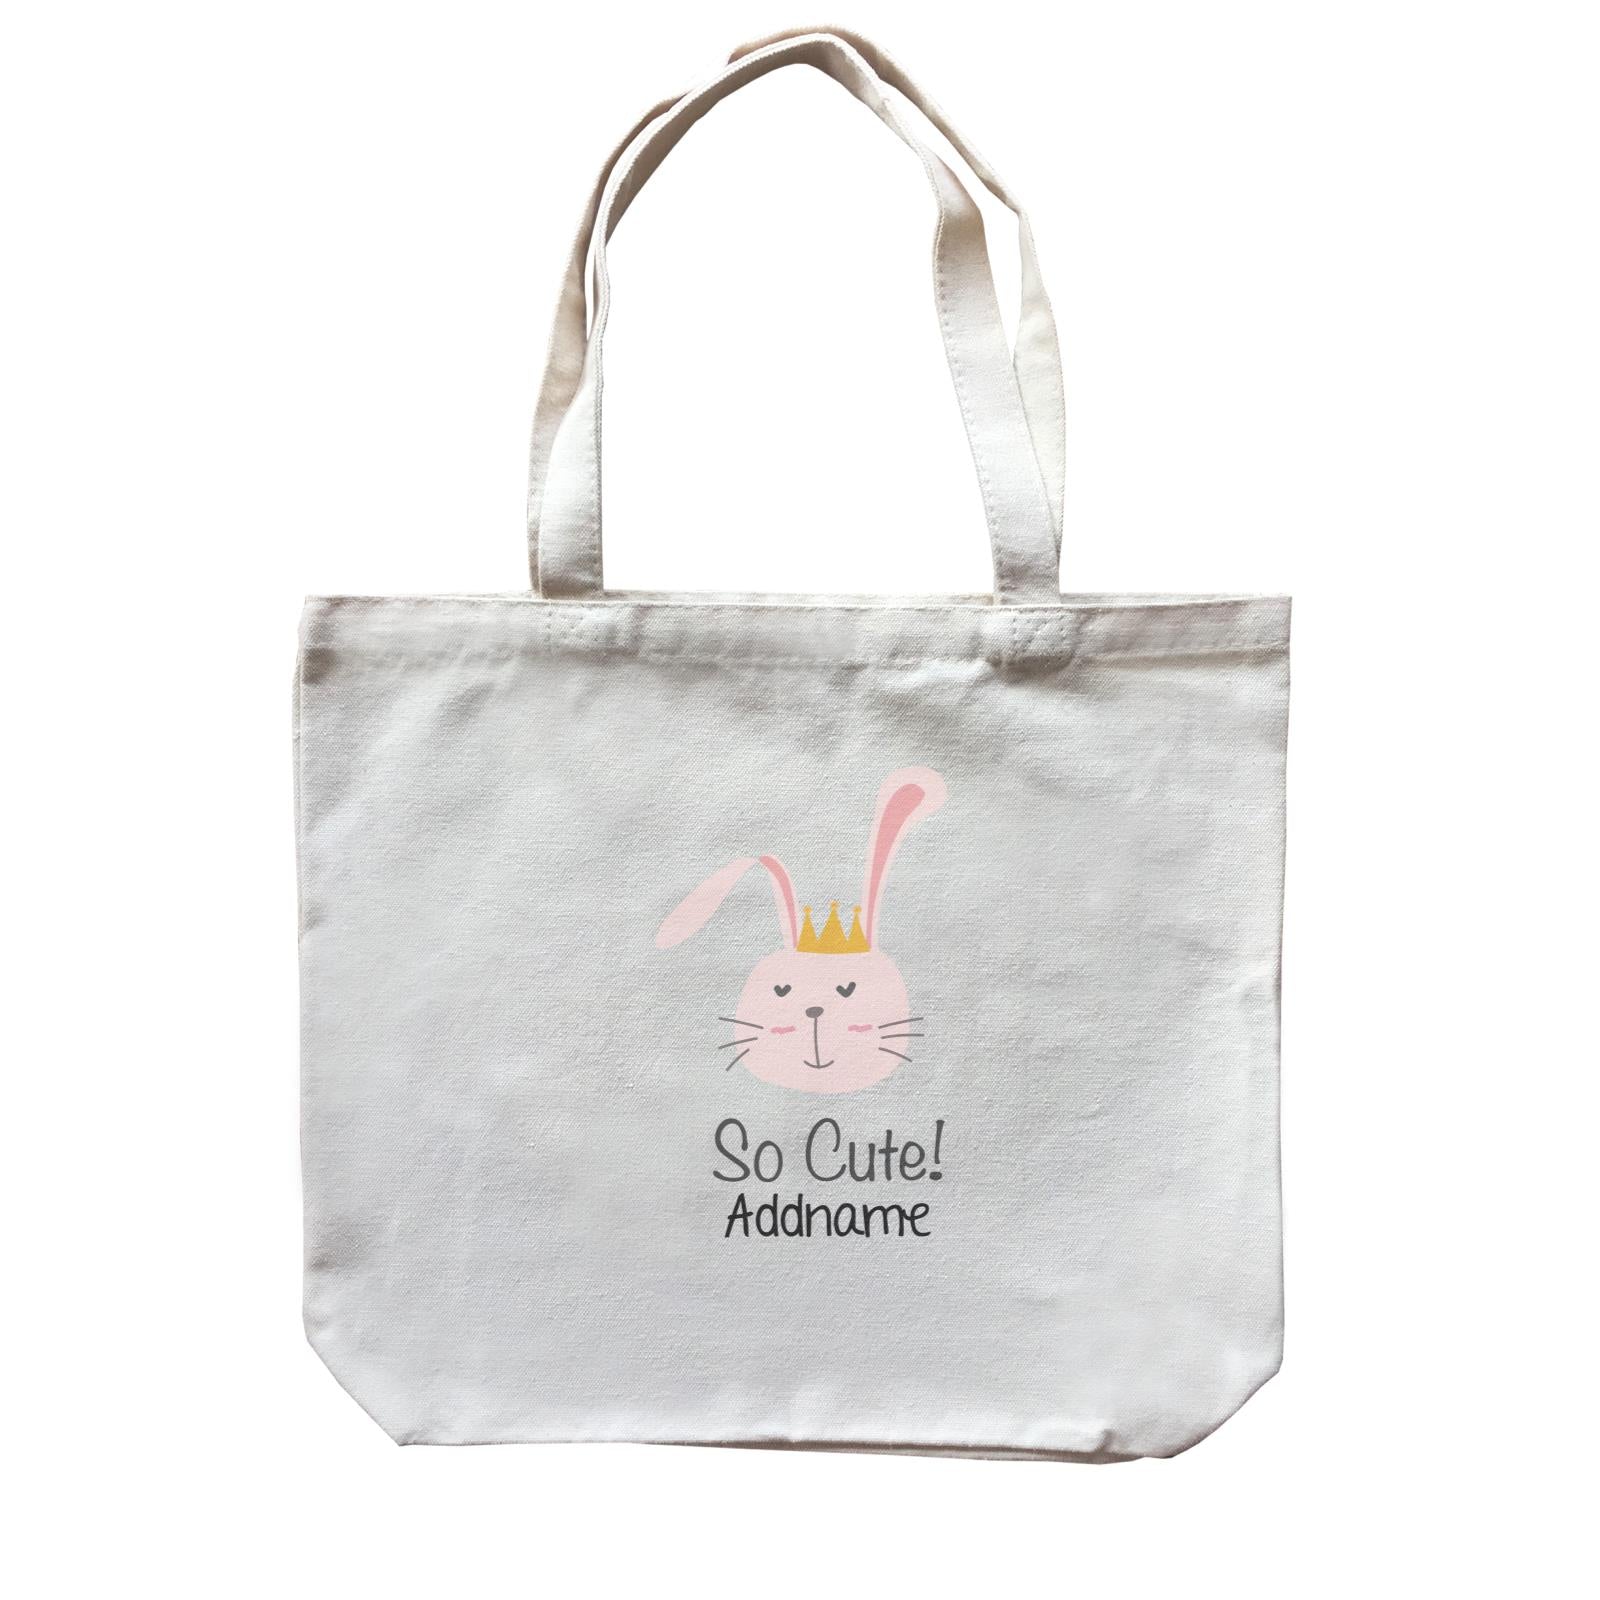 Cute Animals And Friends Series Cute Love Bunny With Crown Addname Canvas Bag